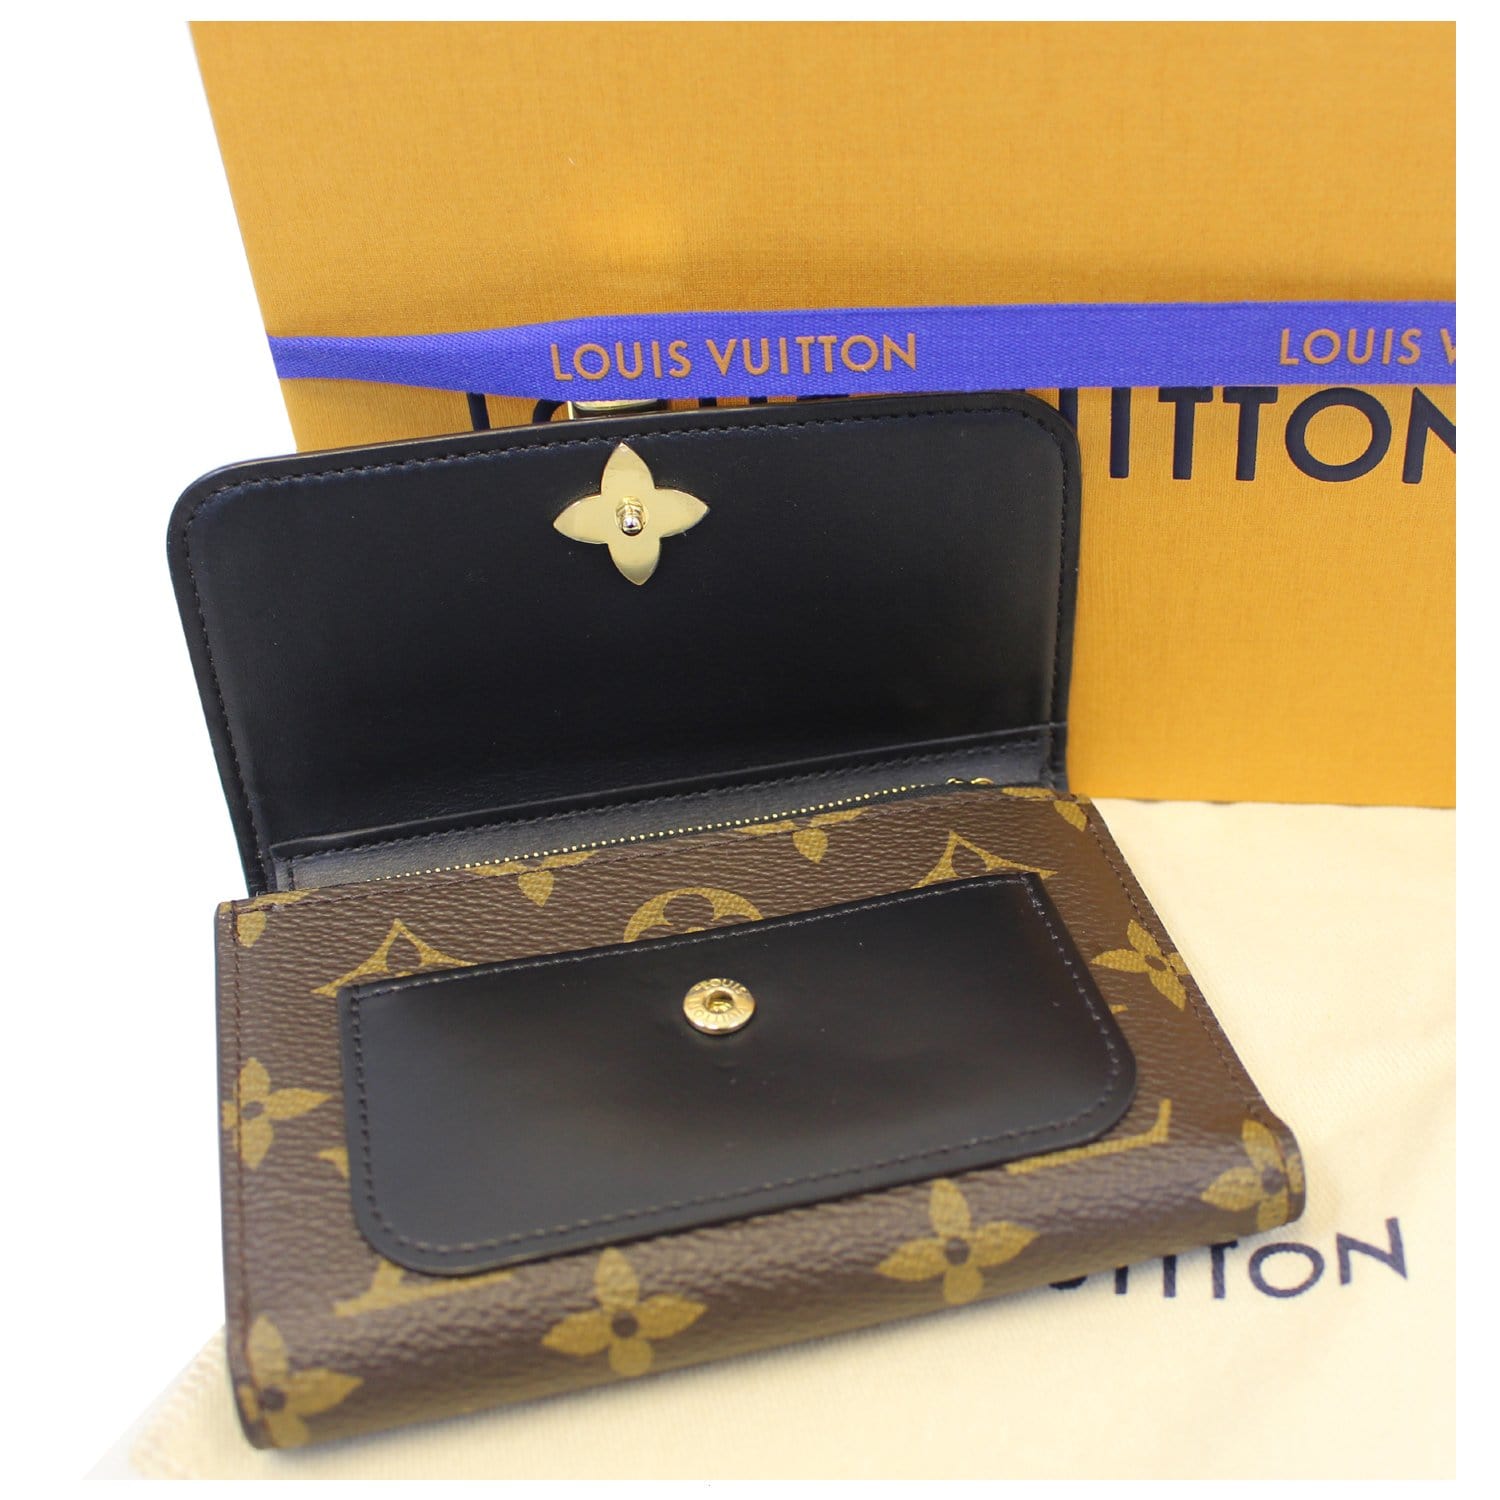 NEW Louis Vuitton Wallet Black Flower SAME DAY SHIPPING for Sale in Plano,  TX - OfferUp